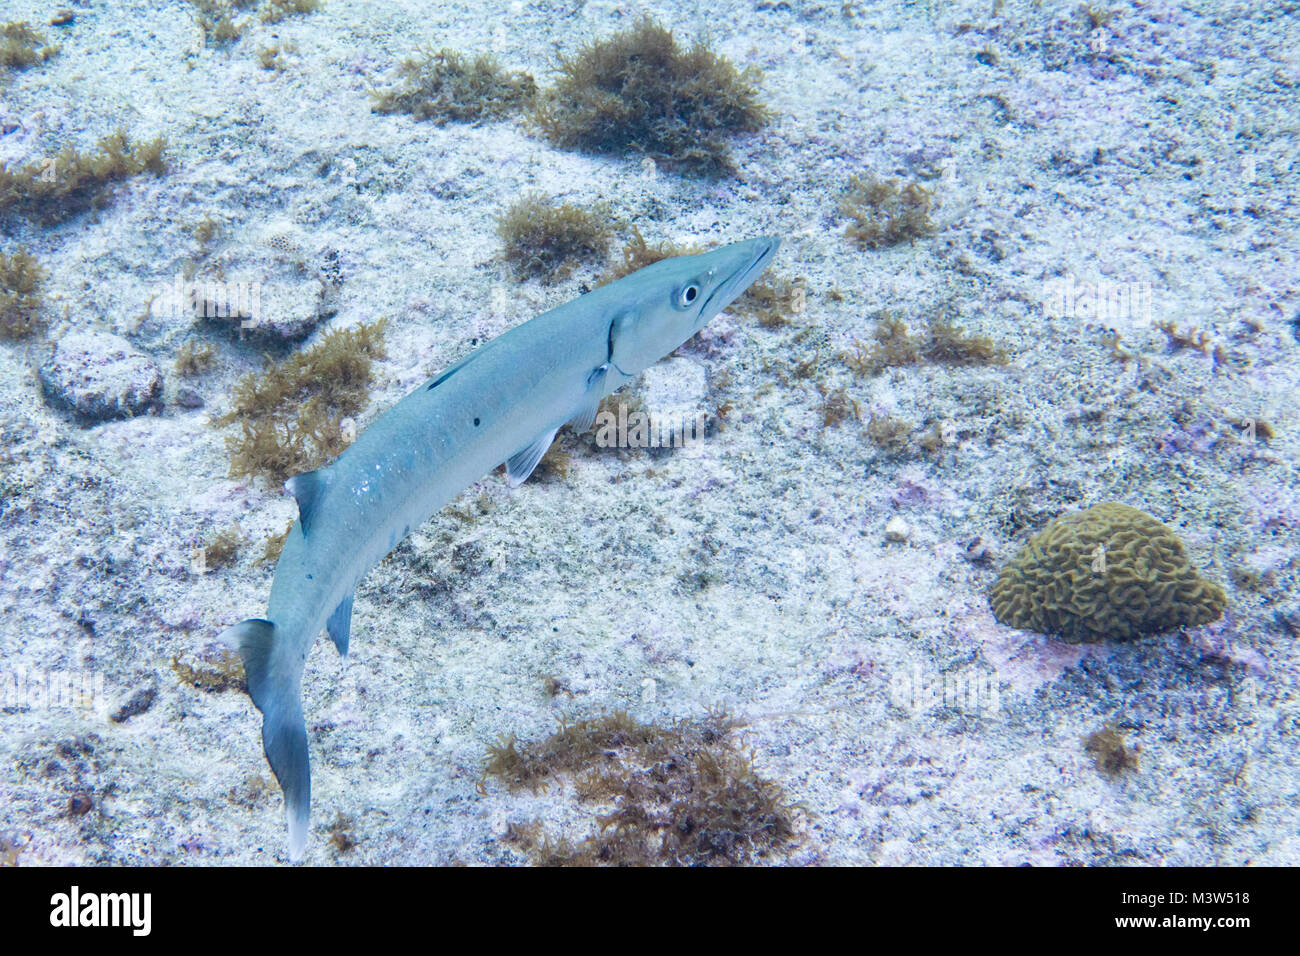 The great barracuda (Sphyraena barracuda) also known as the giant barracuda, is a common species of barracuda found in subtropical oceans around the w Stock Photo